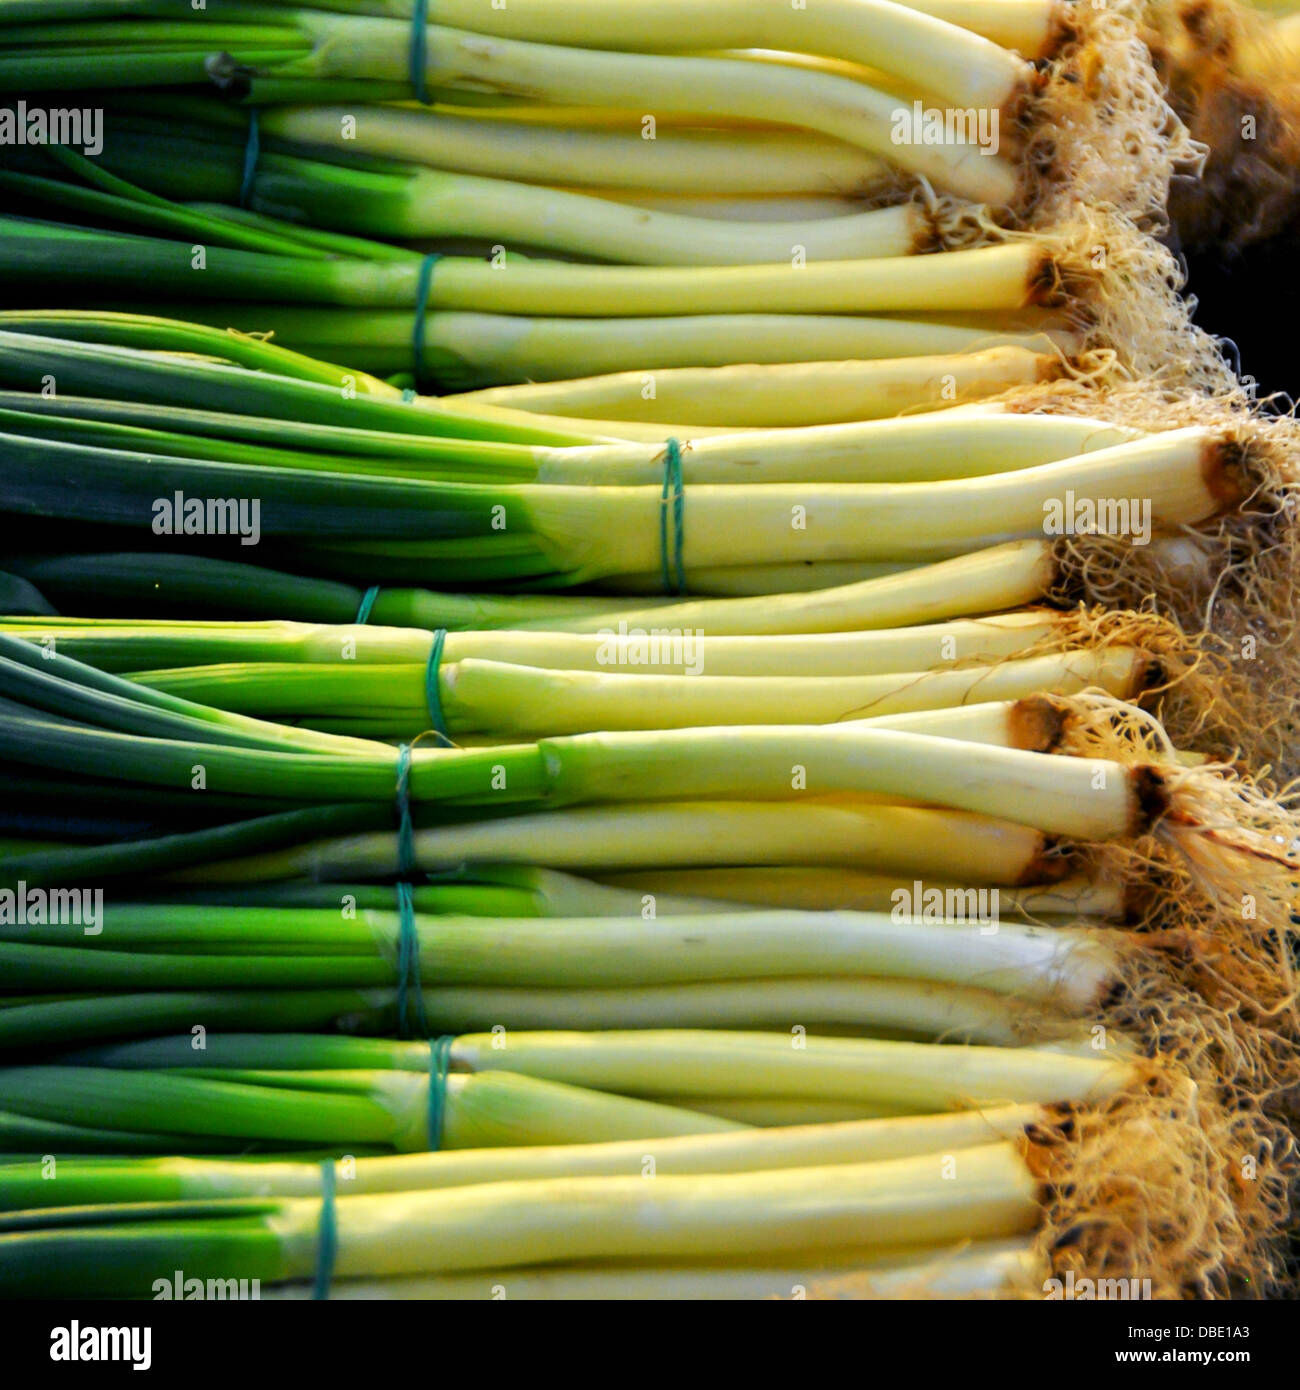 Spring onions at a Market Stall Photographed in Budapest, Hungary Stock Photo